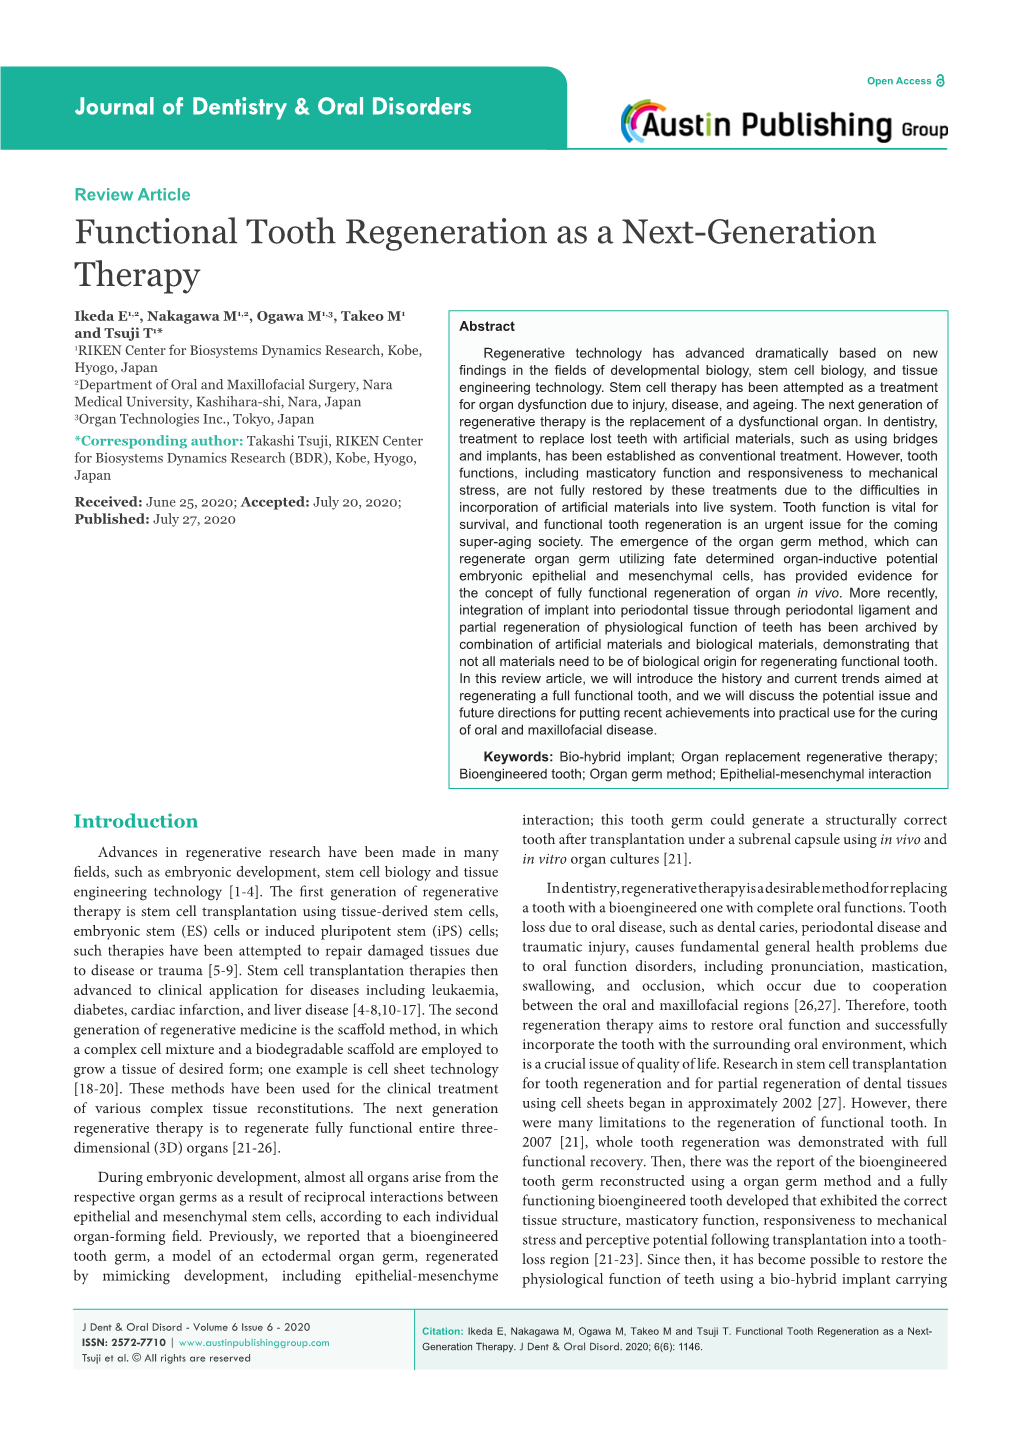 Functional Tooth Regeneration As a Next-Generation Therapy